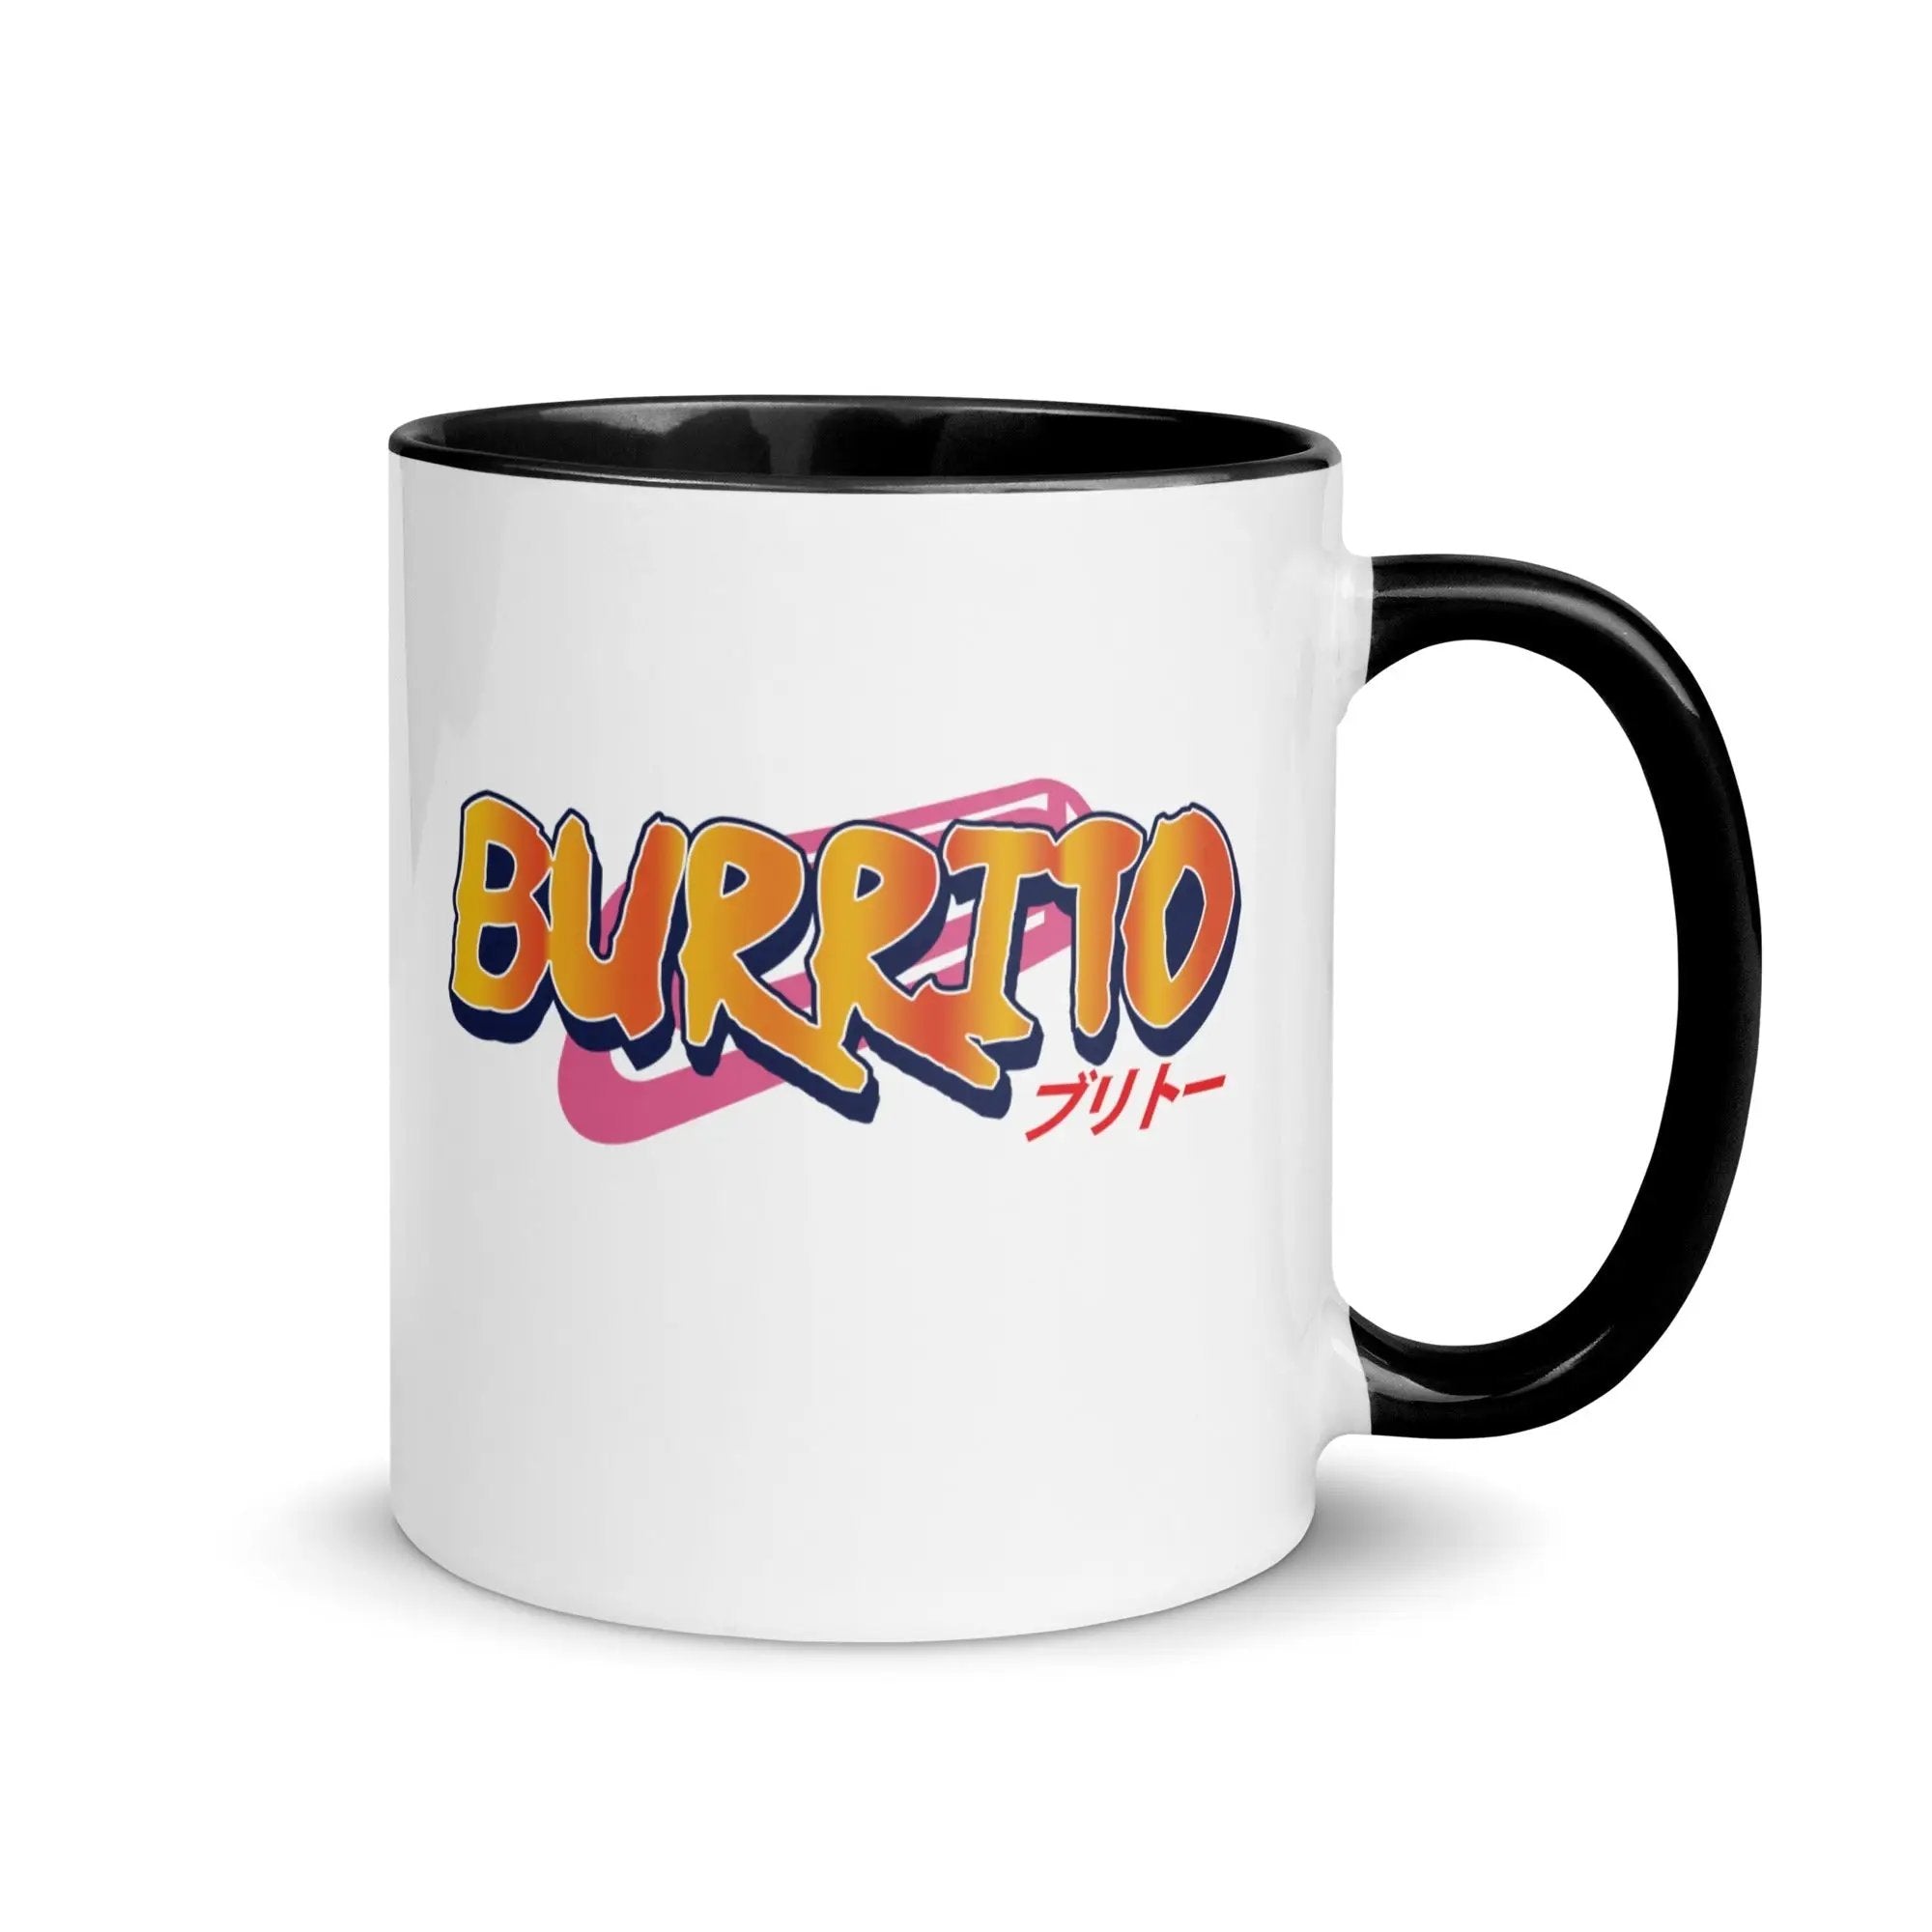 a black and white coffee mug with the word burrito on it